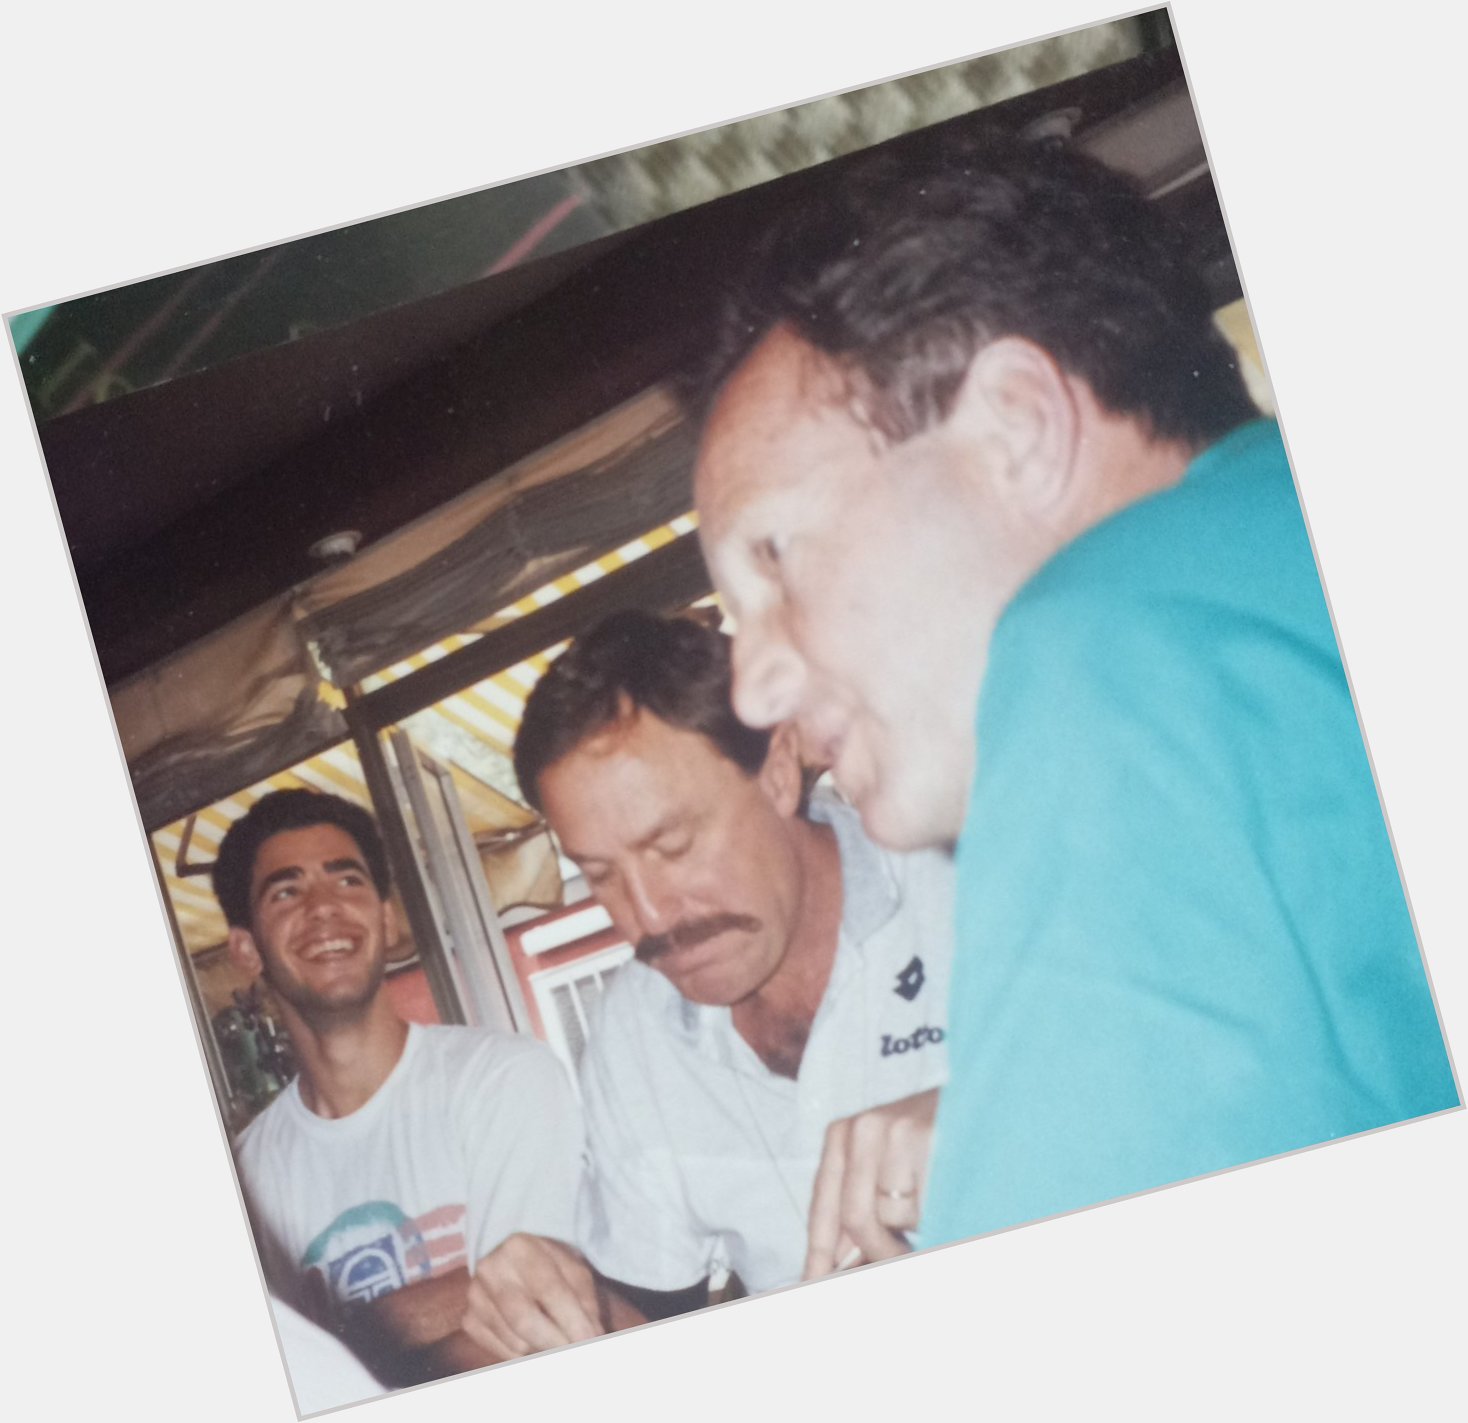 Happy Birthday Tom Okker. Lunching here with John Newcombe and a very young Pete Sampras at Foro Italico in 1990\s. 